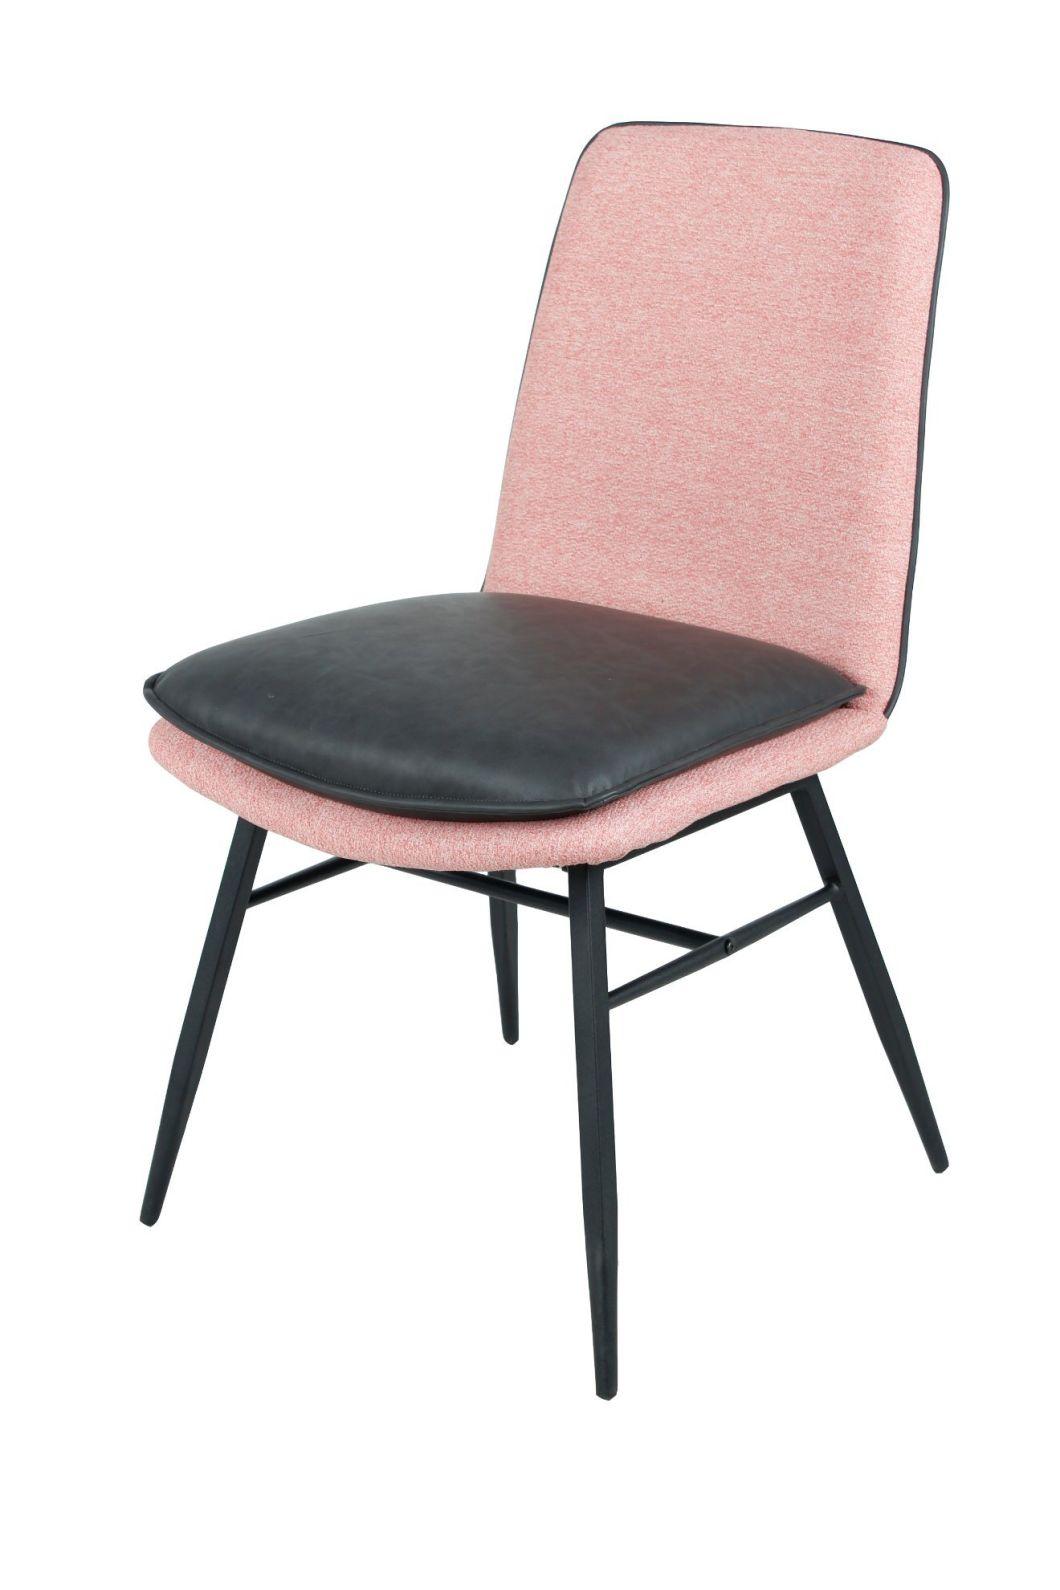 Modern Simple Design Hotel Restaurant Cafe Furniture Fabric PU Leather Dining Chair